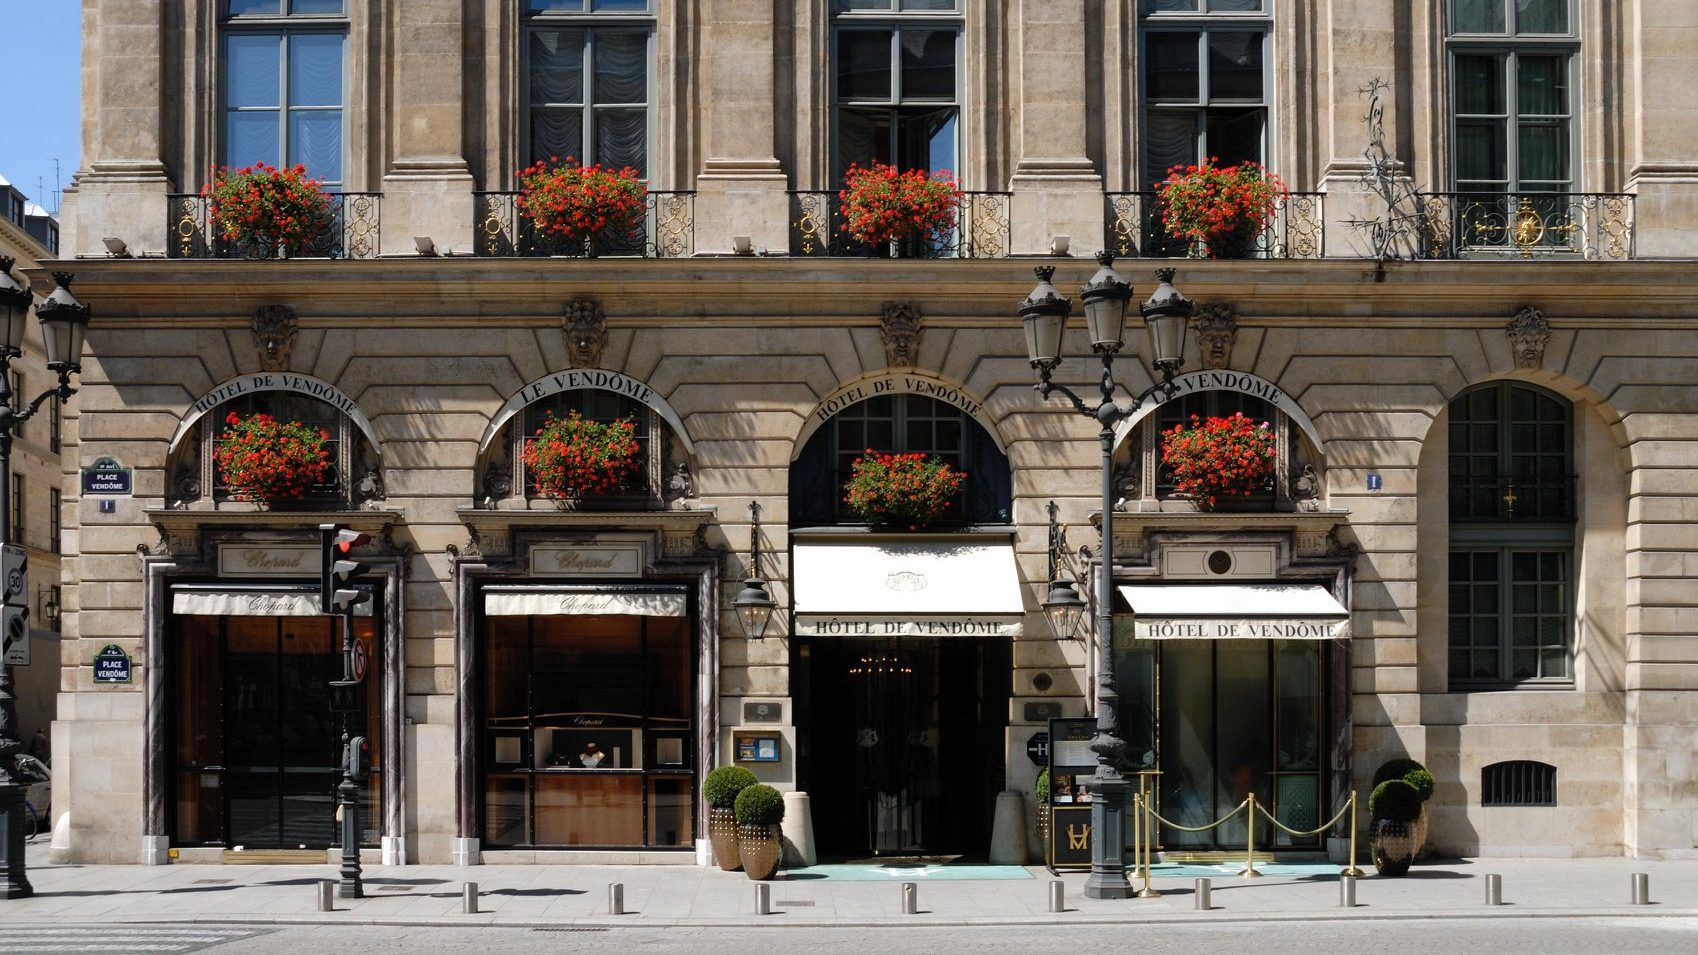 Louis Vuitton will open its first hotel in Paris